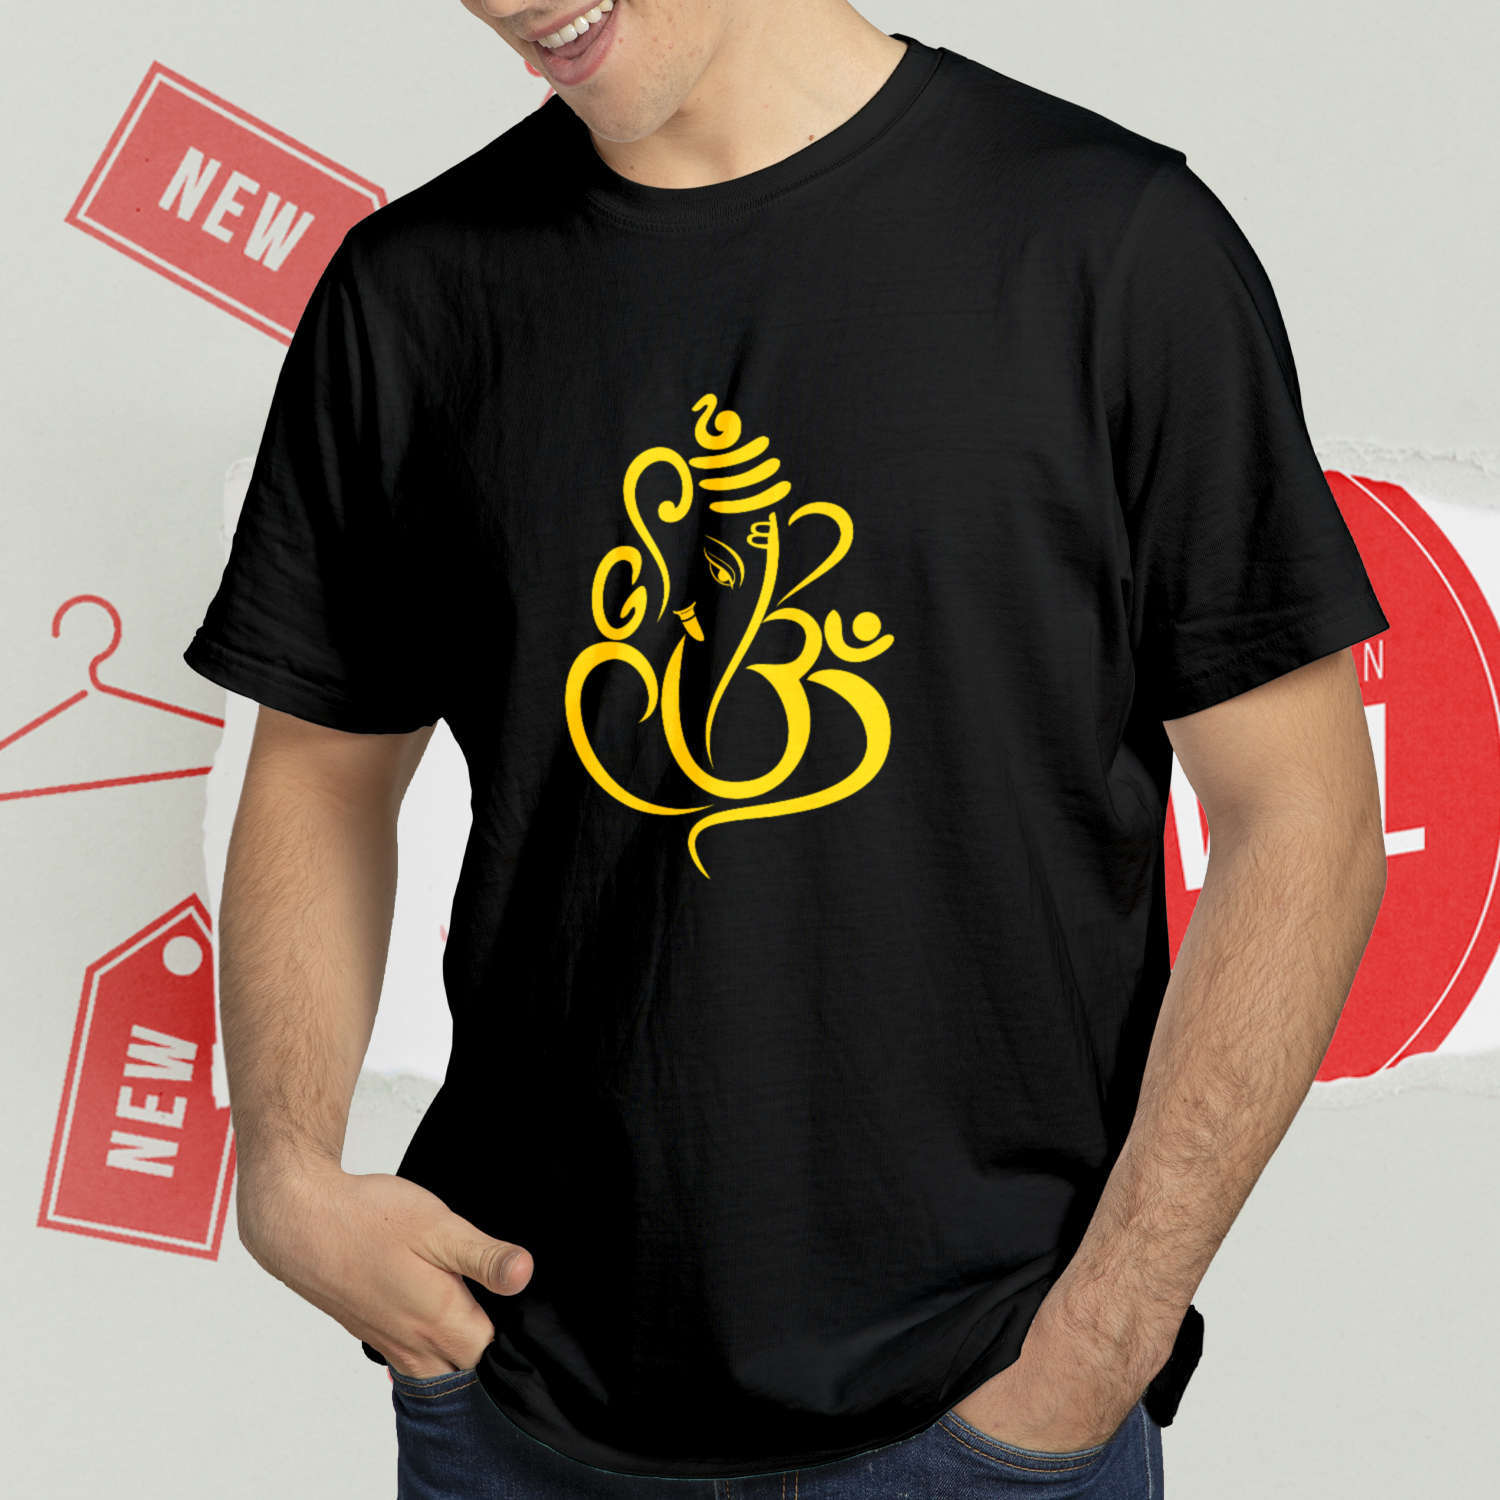 Get your own customized Ganpati T-shirt for the year 2018! Visit  http://akssports.in/wp/ganapati-spec… | Sport shirt design, Indian wedding  suits men, Sports shirts